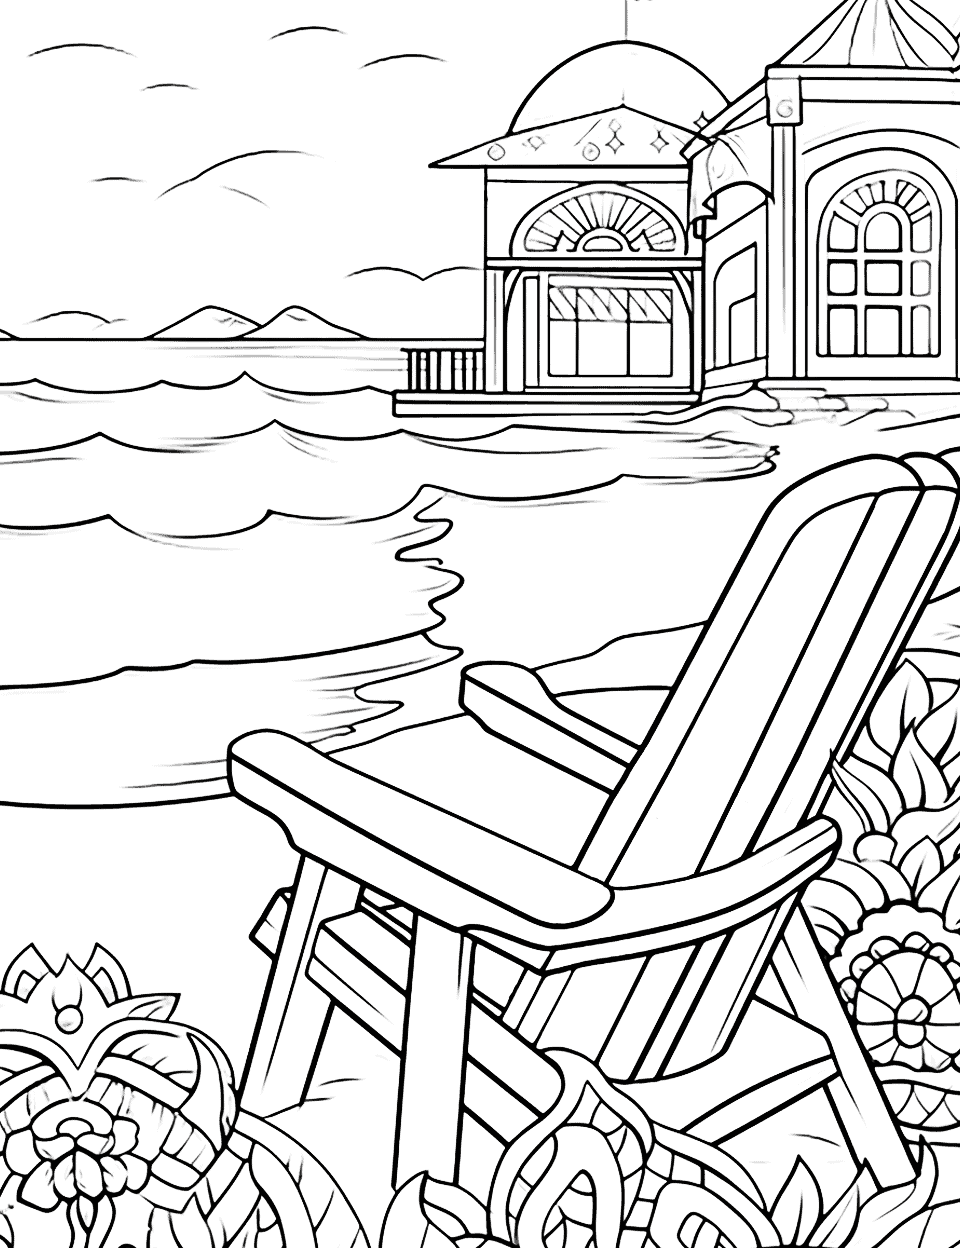 The Realistic Summer Beach Adult Coloring Page - A realistic beach scene complete with crashing waves, sand castles, and seagulls.